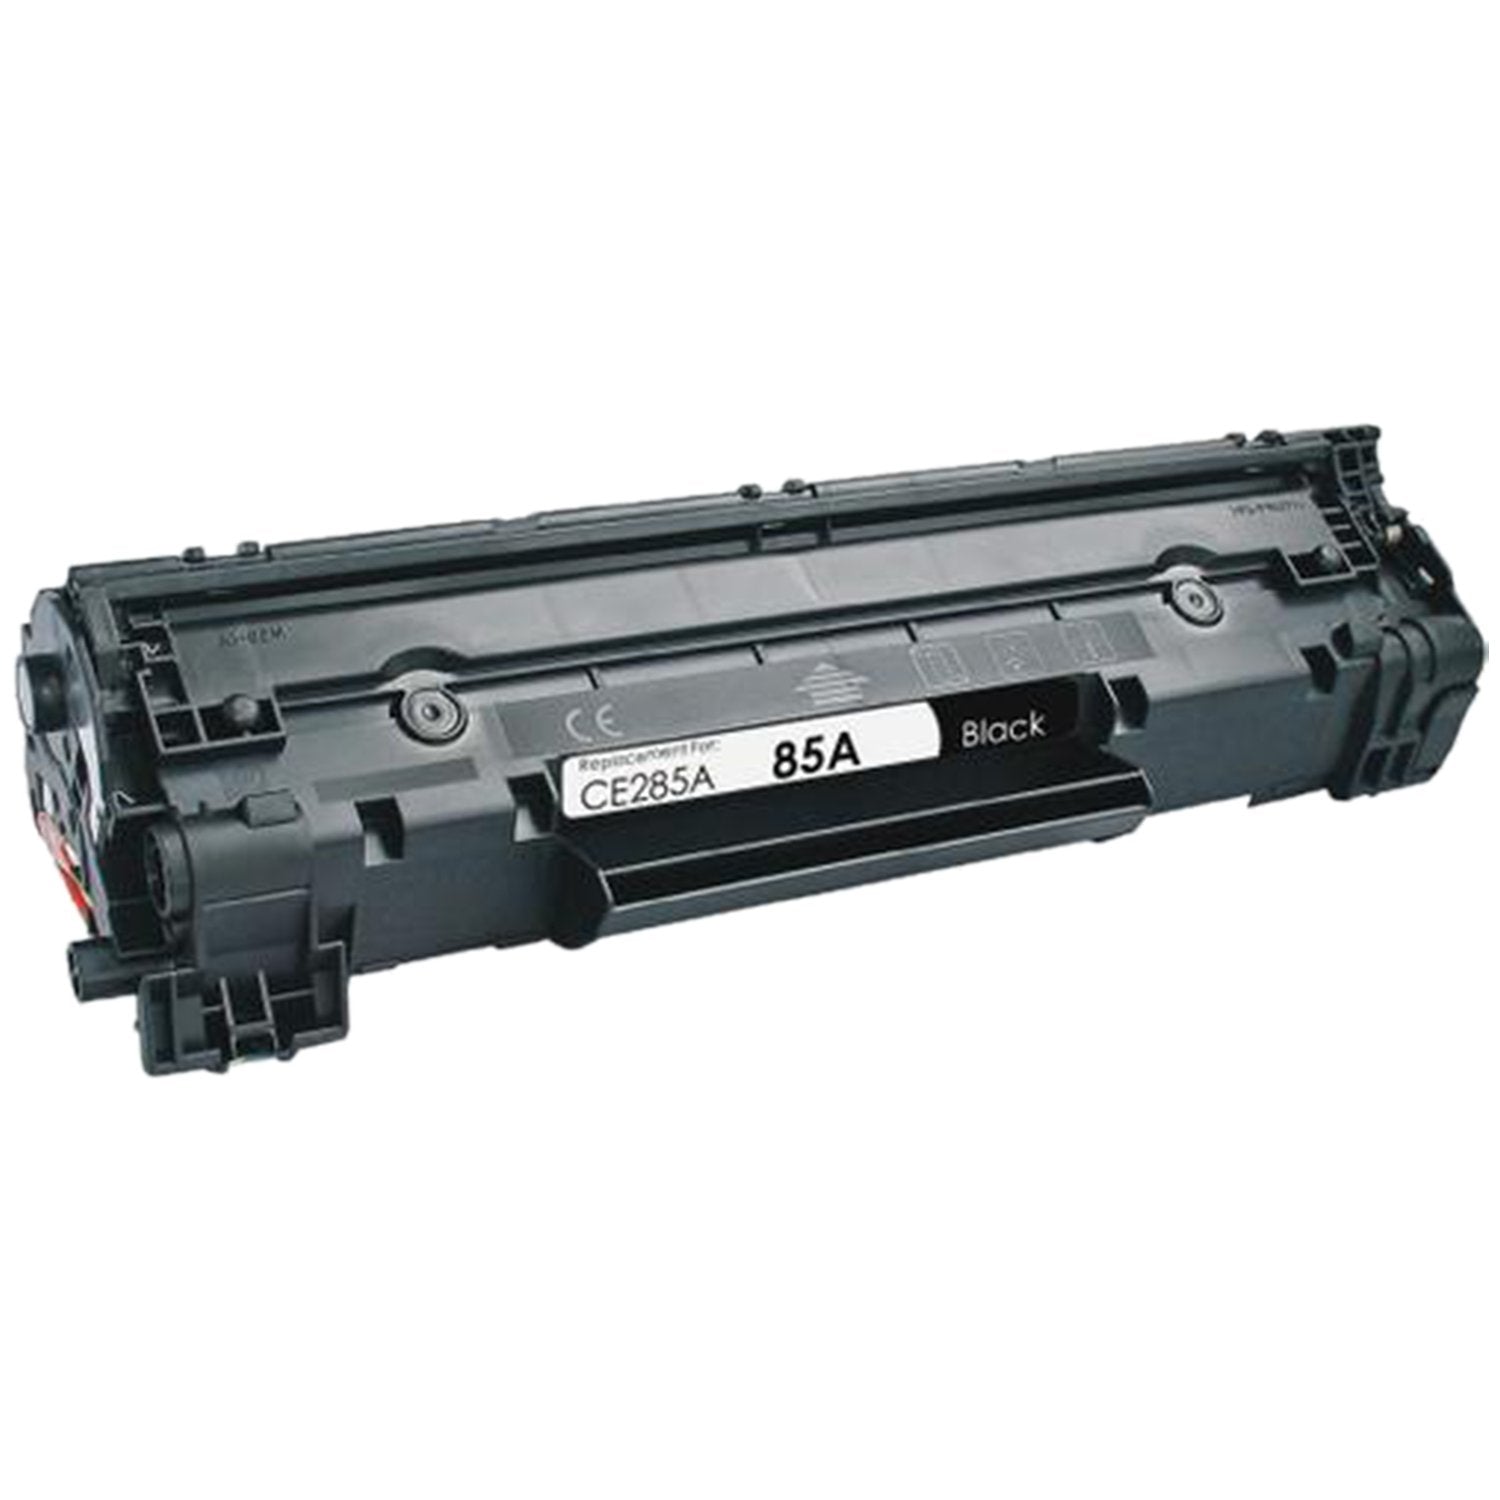 AbsoluteToner Toner Laser Cartridge Compatible With HP 85A (CE285A) Black-Get 1